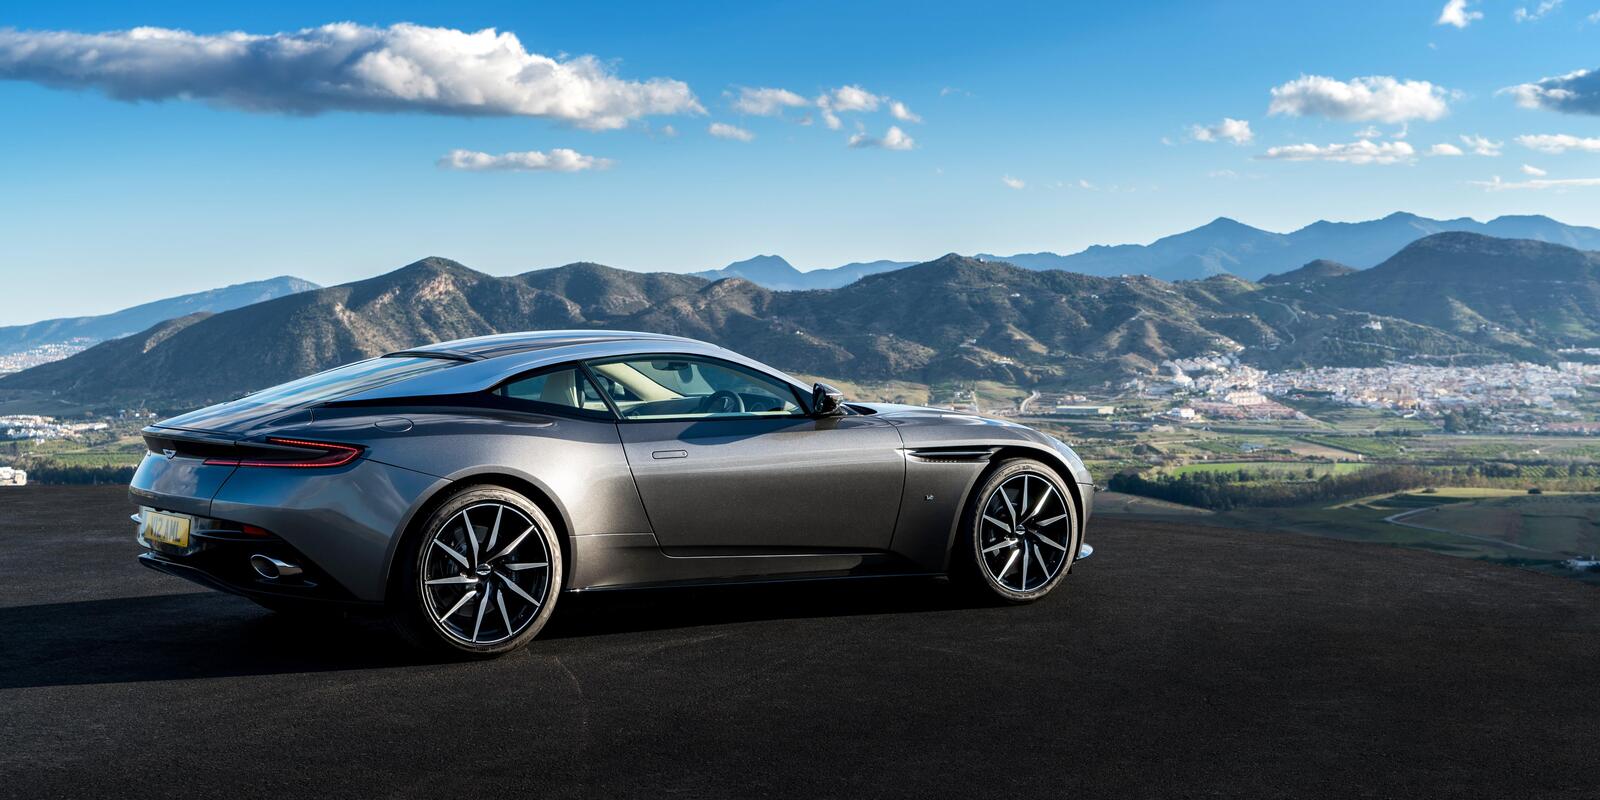 Wallpapers Aston Martin cars coupe on the desktop